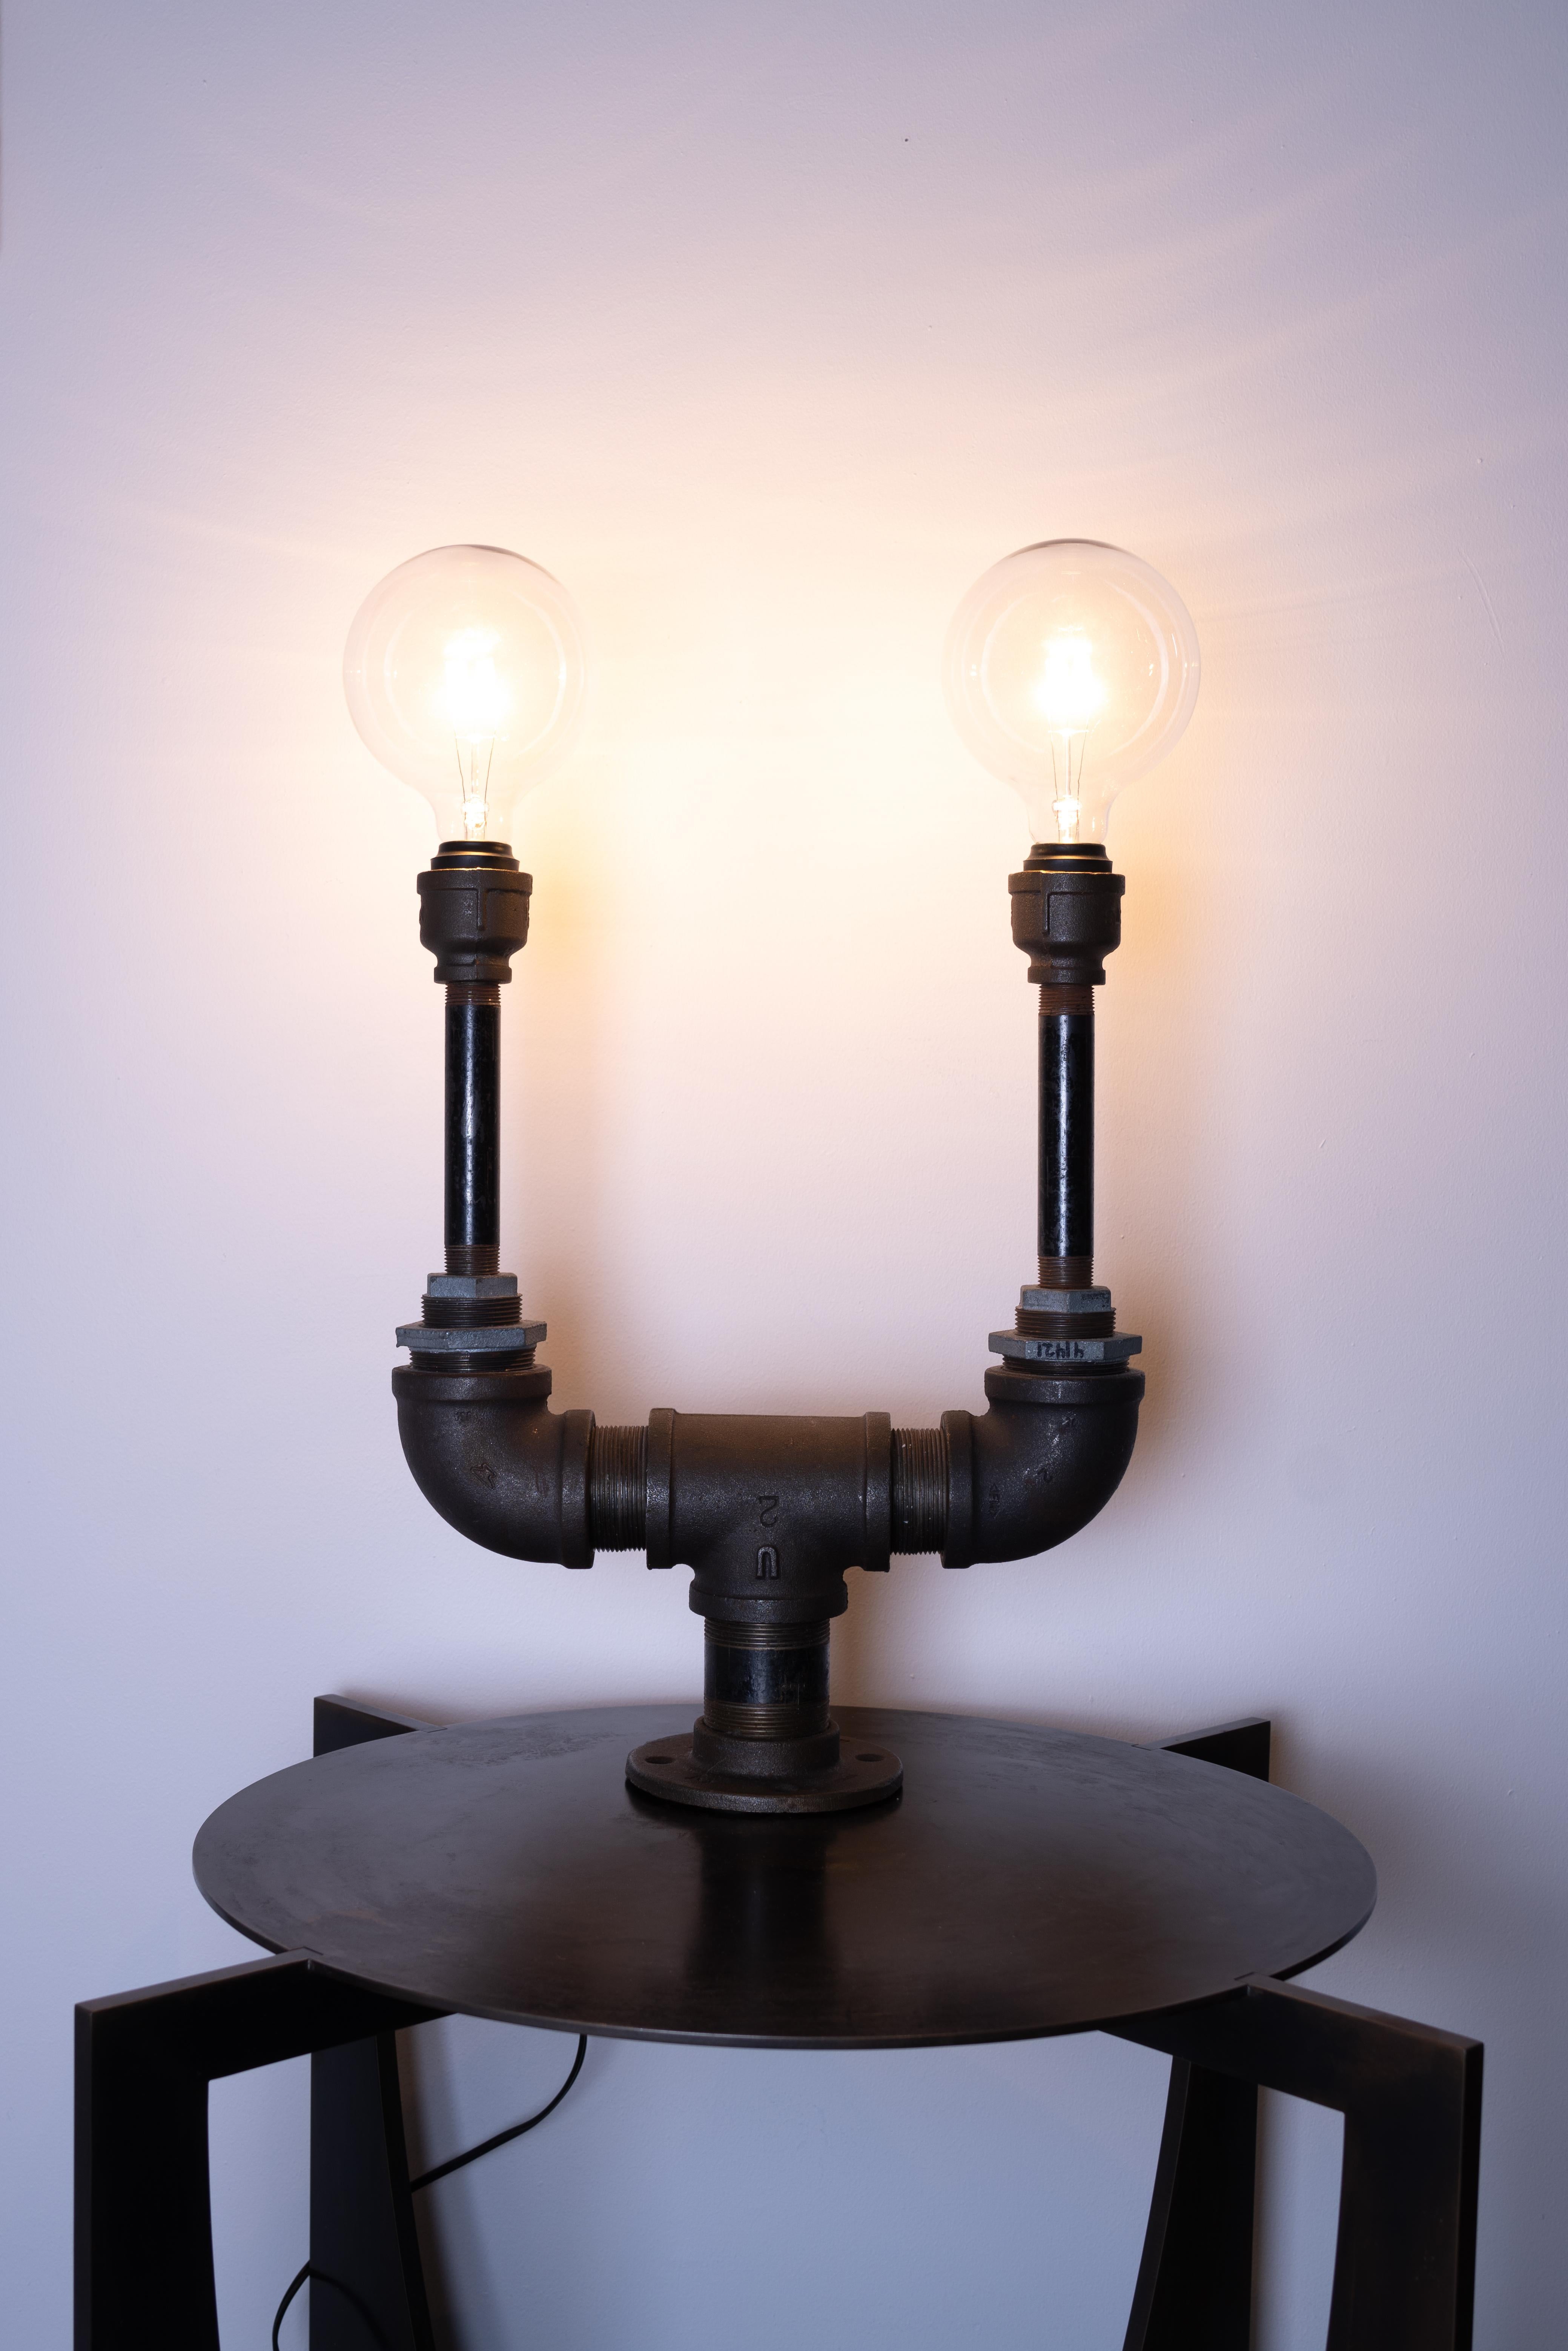 Industrial table lamp by Edelman New York. Made from uniquely sourced, recycled metal piping and fixtures. 

- ) Designed and handmade by Female Founded Design Firm 
- ) Made in the USA
- ) Repurposed materials 
- ) Dimmable Globe Bulb (Not